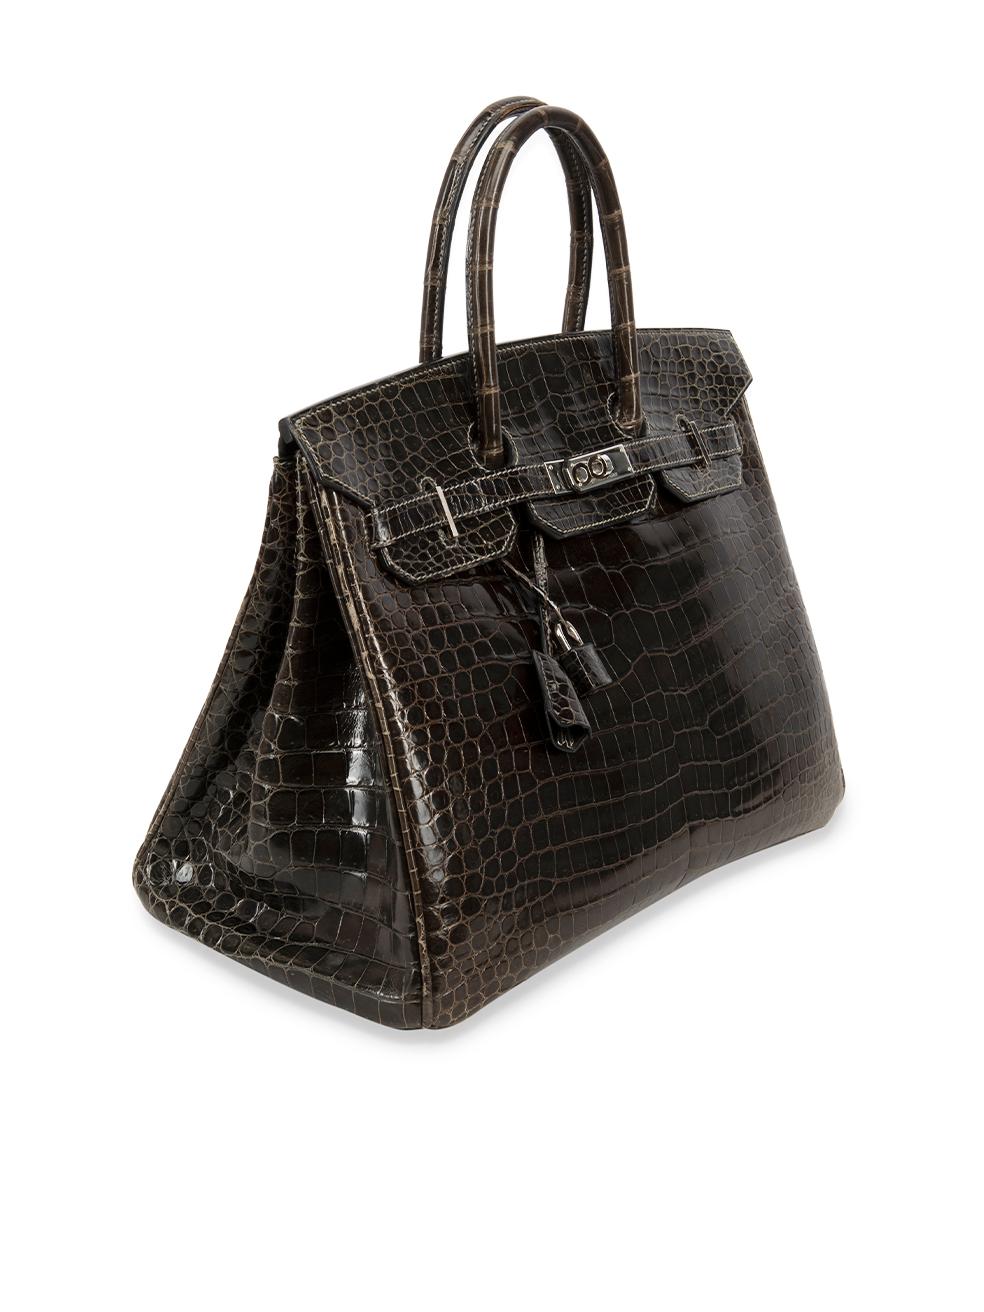 CONDITION is Very good. Minimal wear to bag is evident. Minimal wear to the front, base handles and sides with light scratches and abrasions to the crocodile leather. The metal hardware also has very light scratches to the silver plating at the